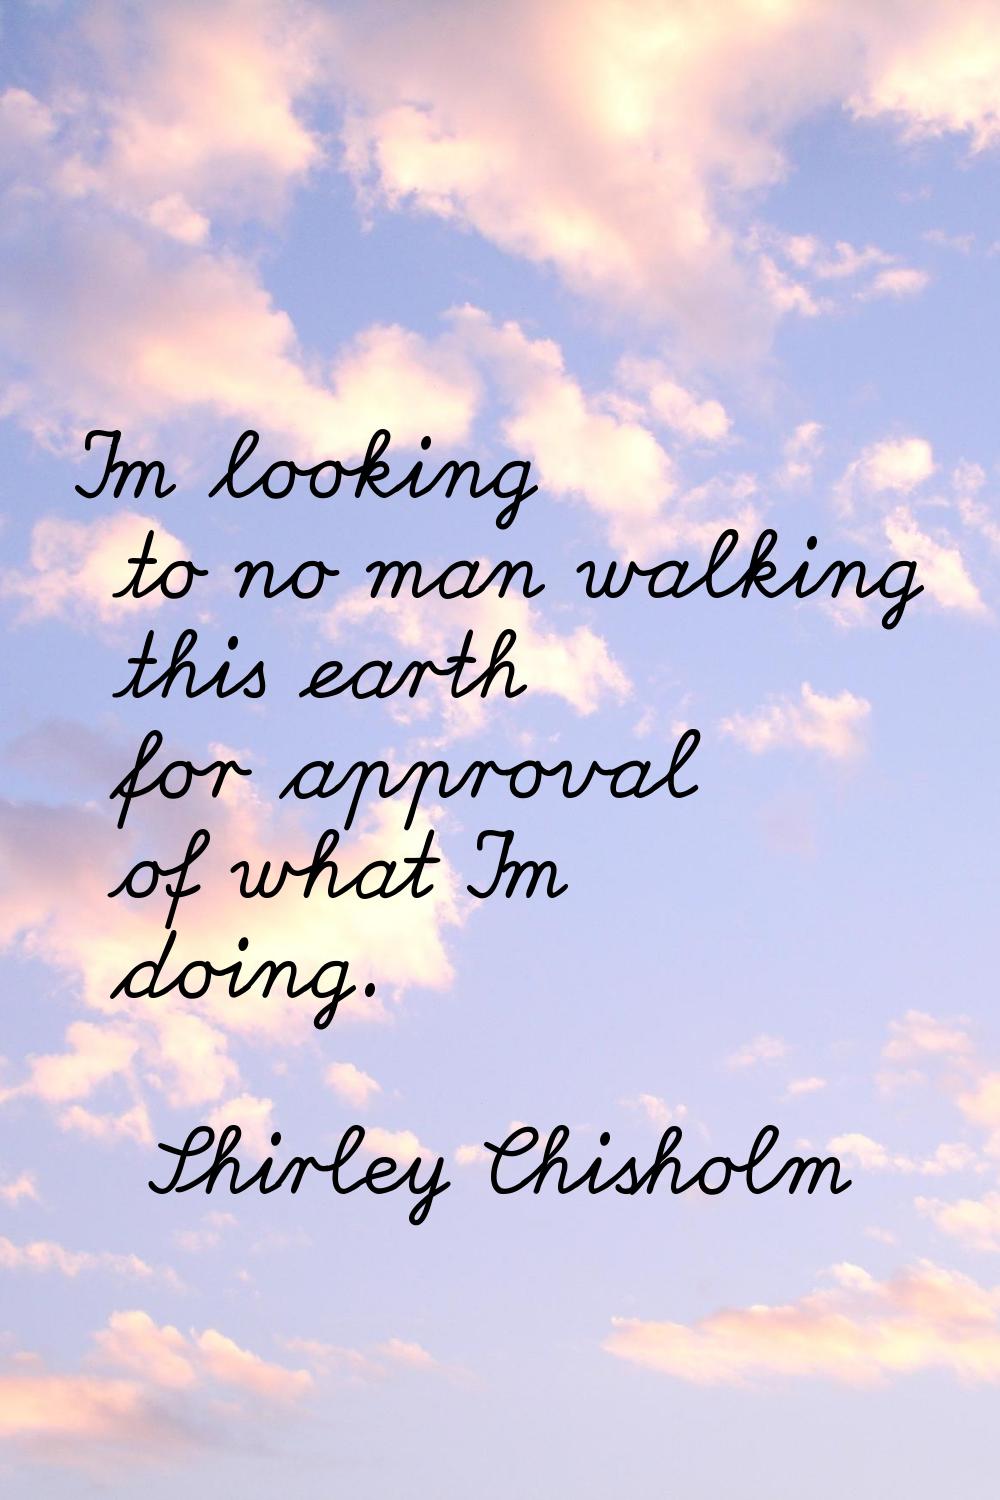 I'm looking to no man walking this earth for approval of what I'm doing.